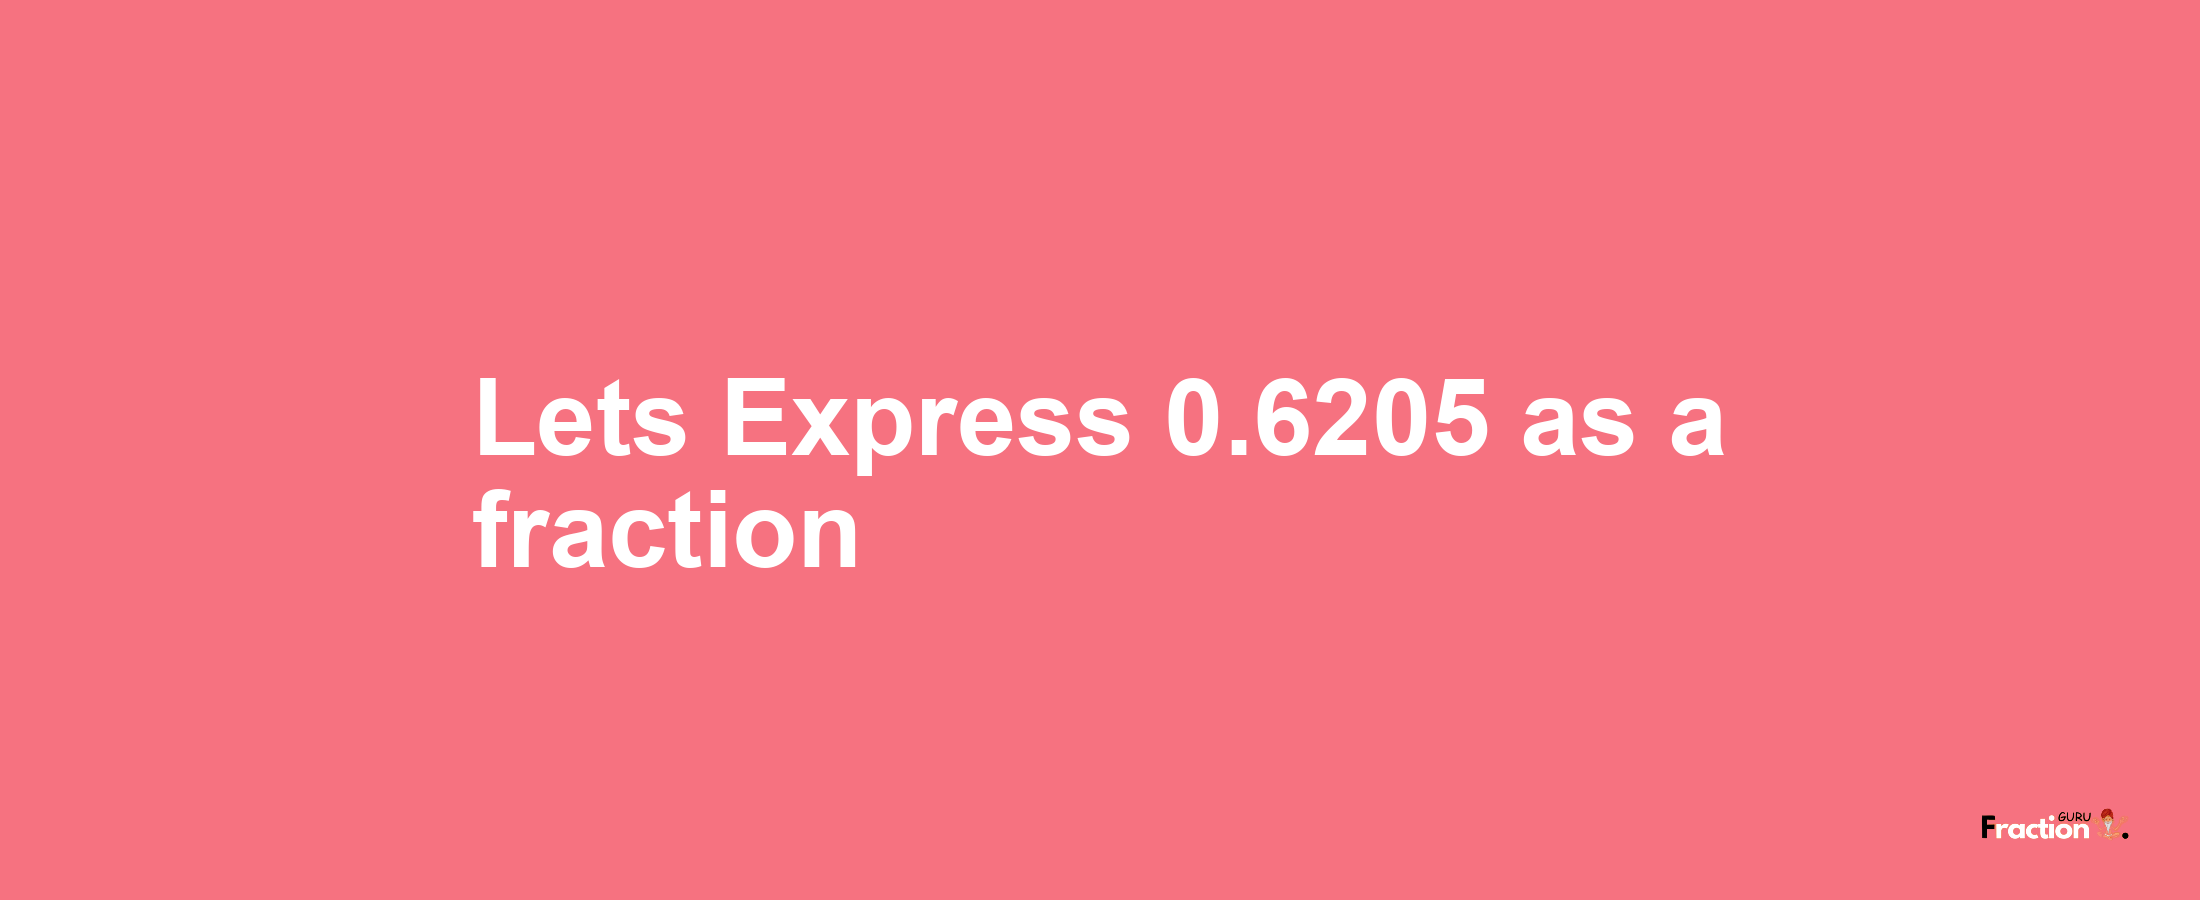 Lets Express 0.6205 as afraction